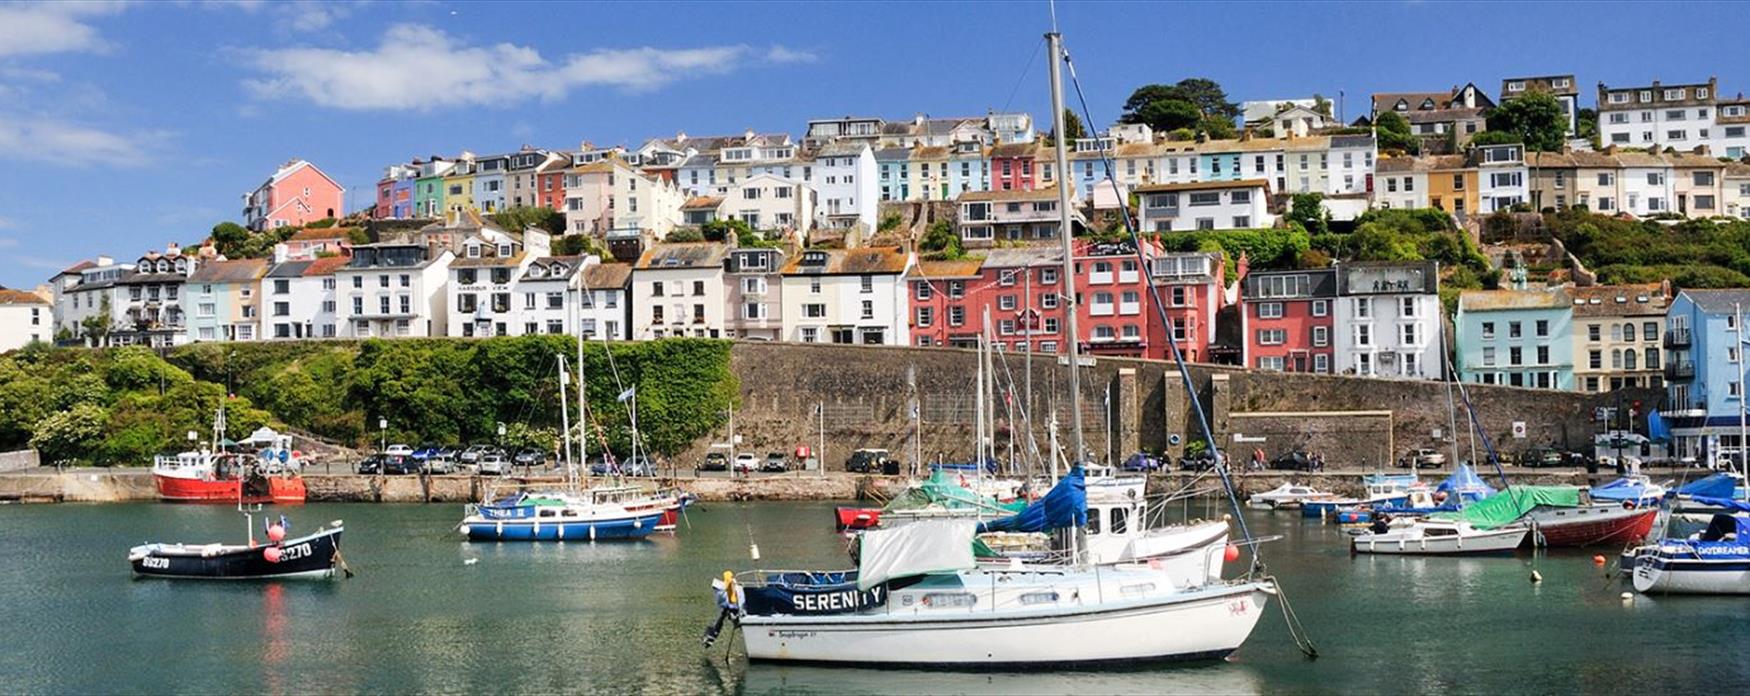 Self Catering Cottages And Apartments In Brixham English Riviera